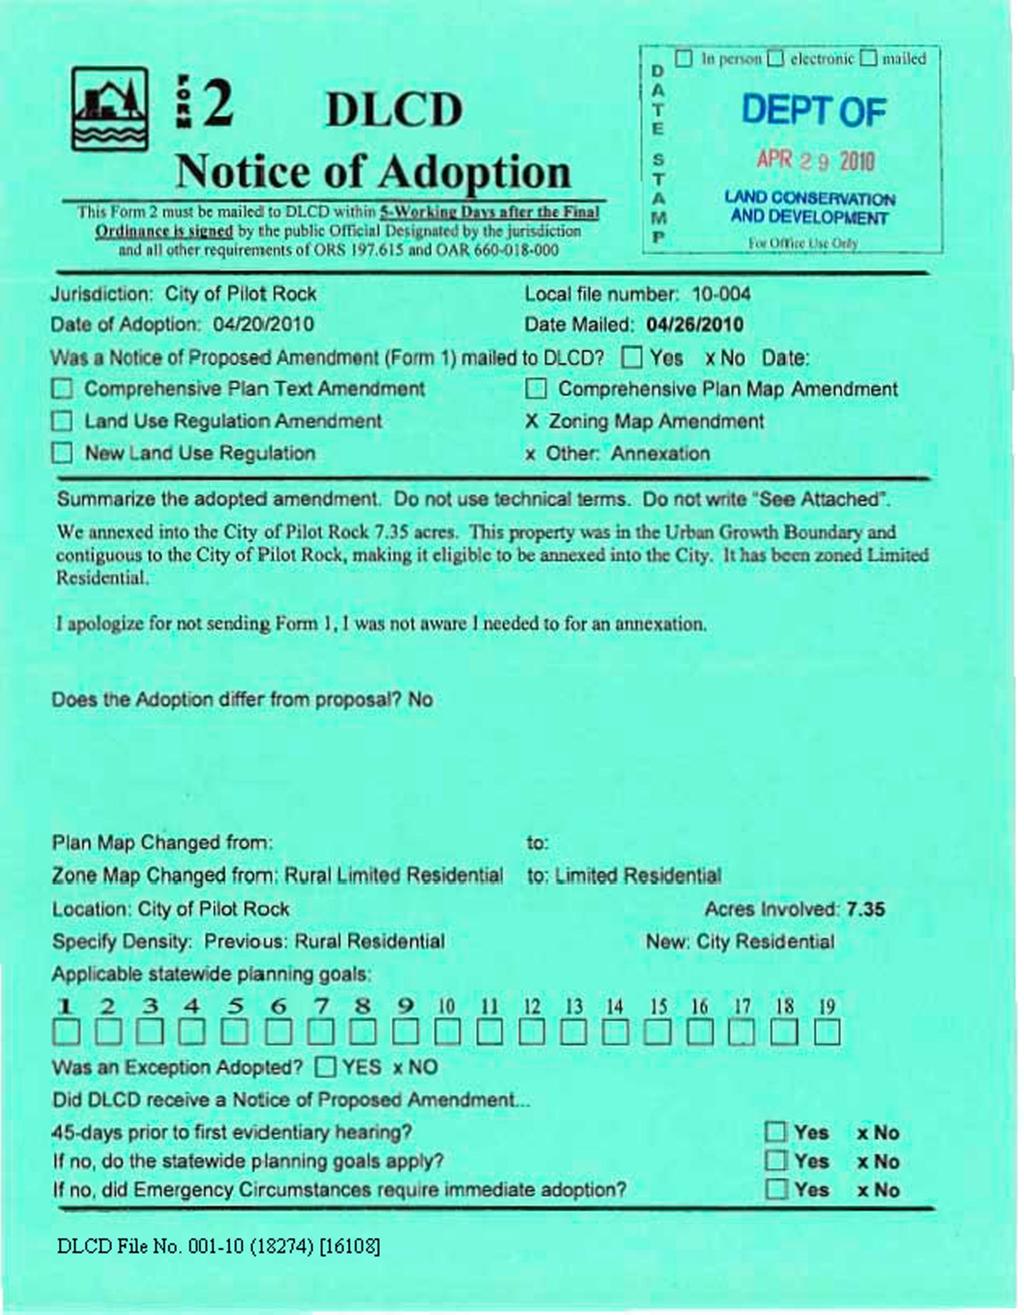 s 2 DLCD Notice of Adoption Thii Form 2 must be mailed to DLCD within 5-Working t>»v> afitr the Final Ordlminct sinned by the public Official DcHgnnin) by the jumdiction and all other requirements of